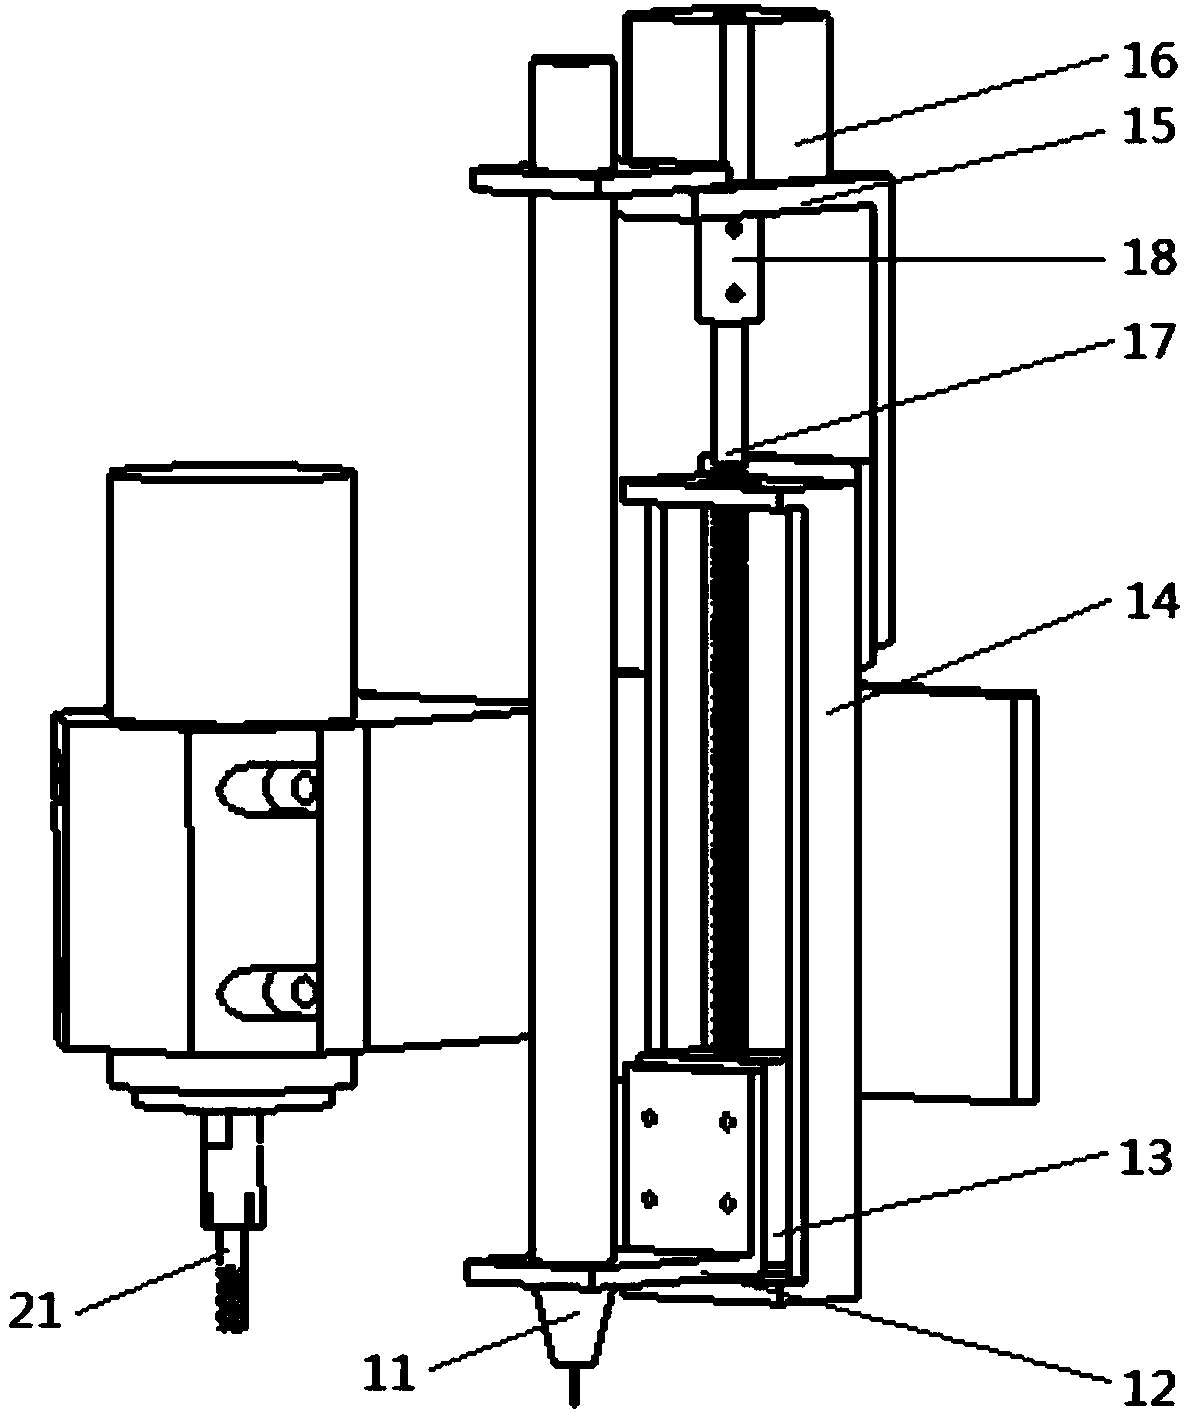 An electric arc additive and milling device